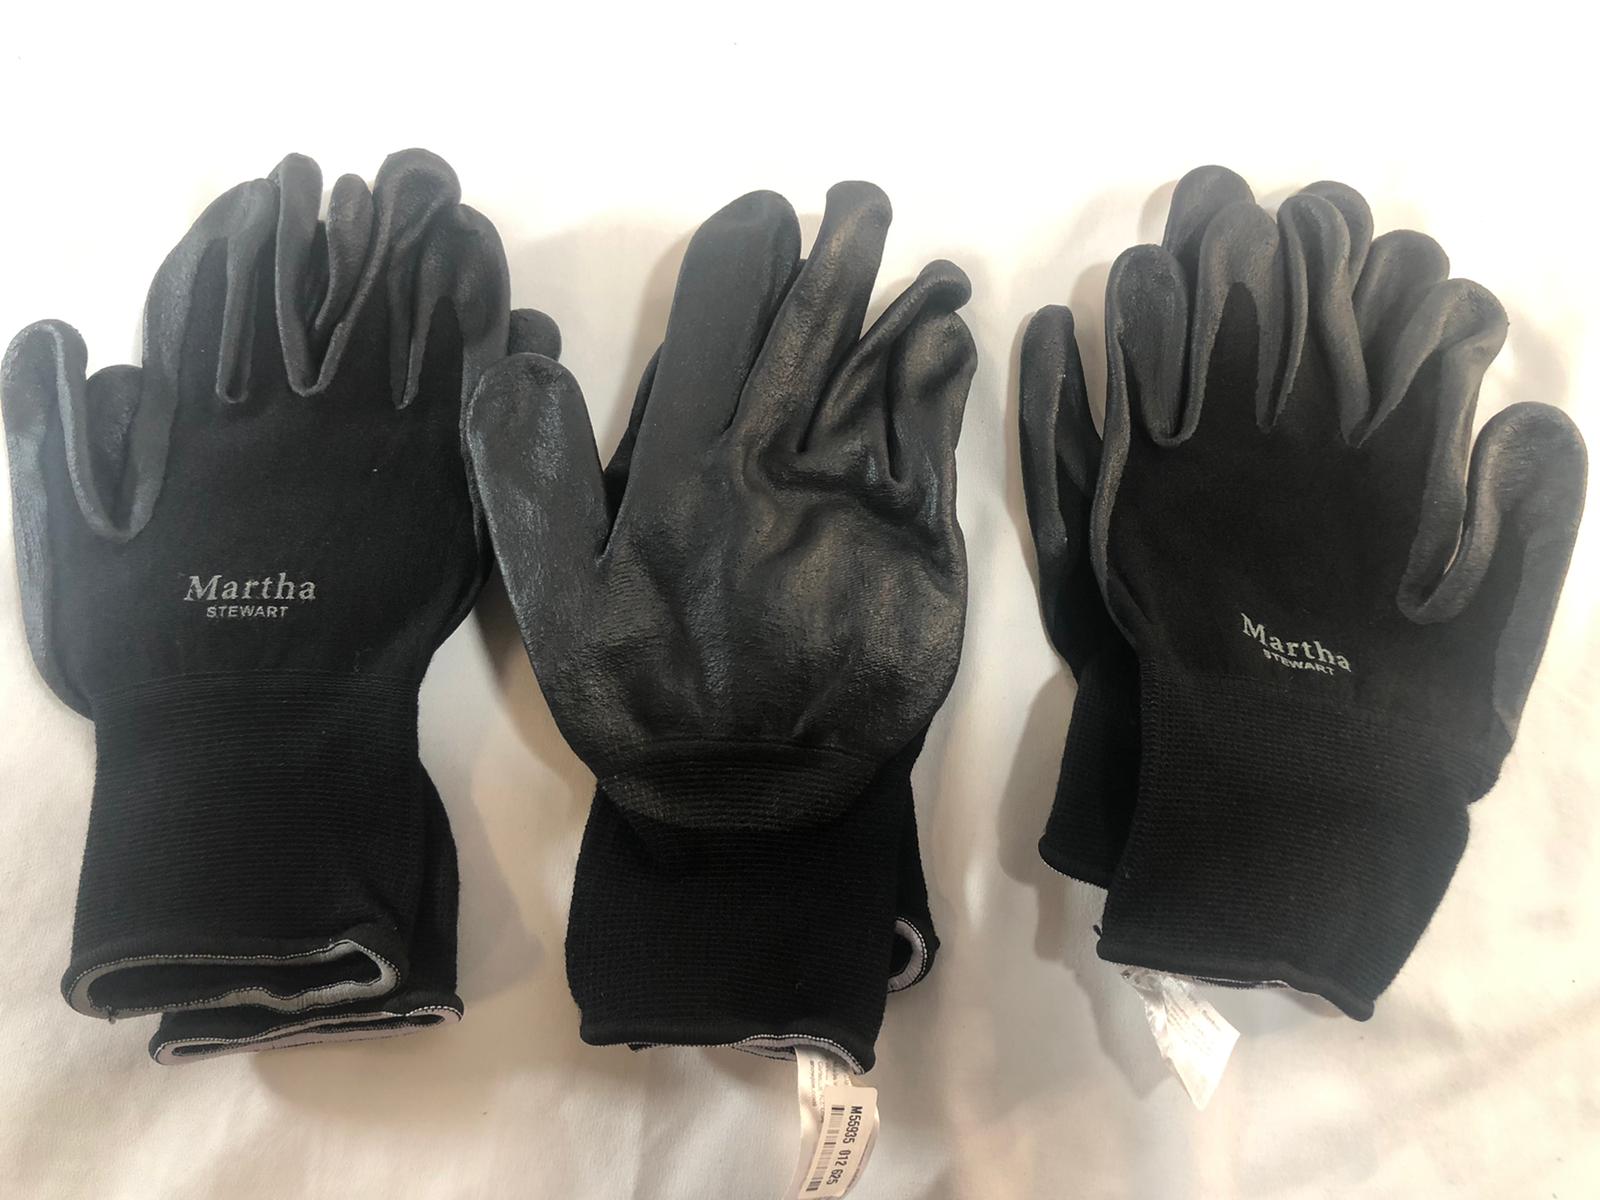 Gorilla Grip Trax Gloves- Size Small Auction